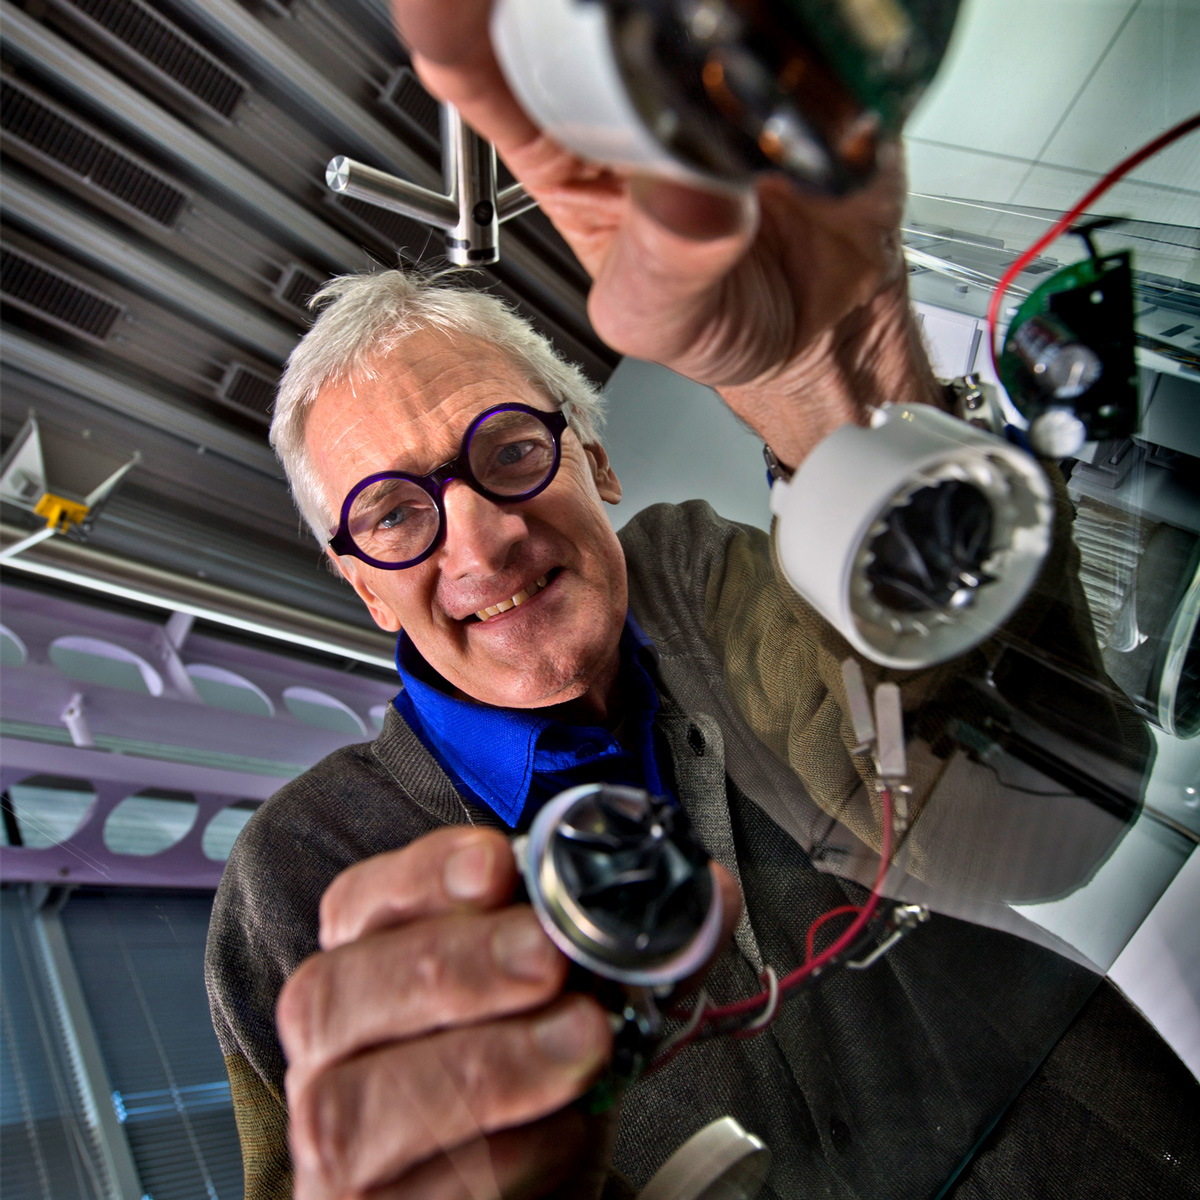 Sir James Dyson at Dyson's UK campus in Malmesbury.